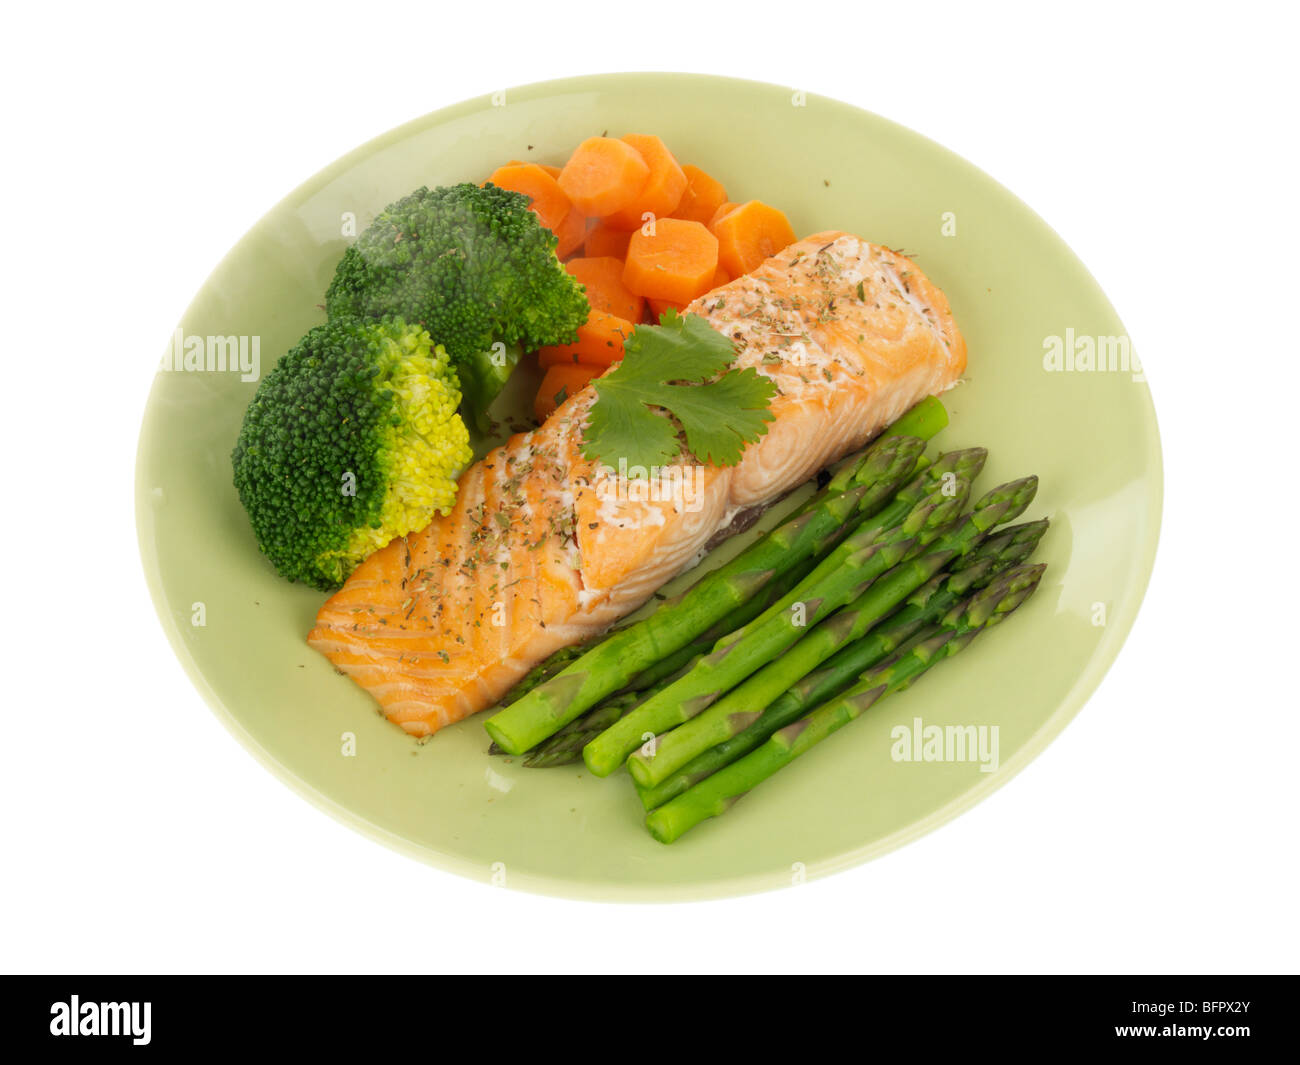 Grilled Salmon with Steamed Vegetables Stock Photo